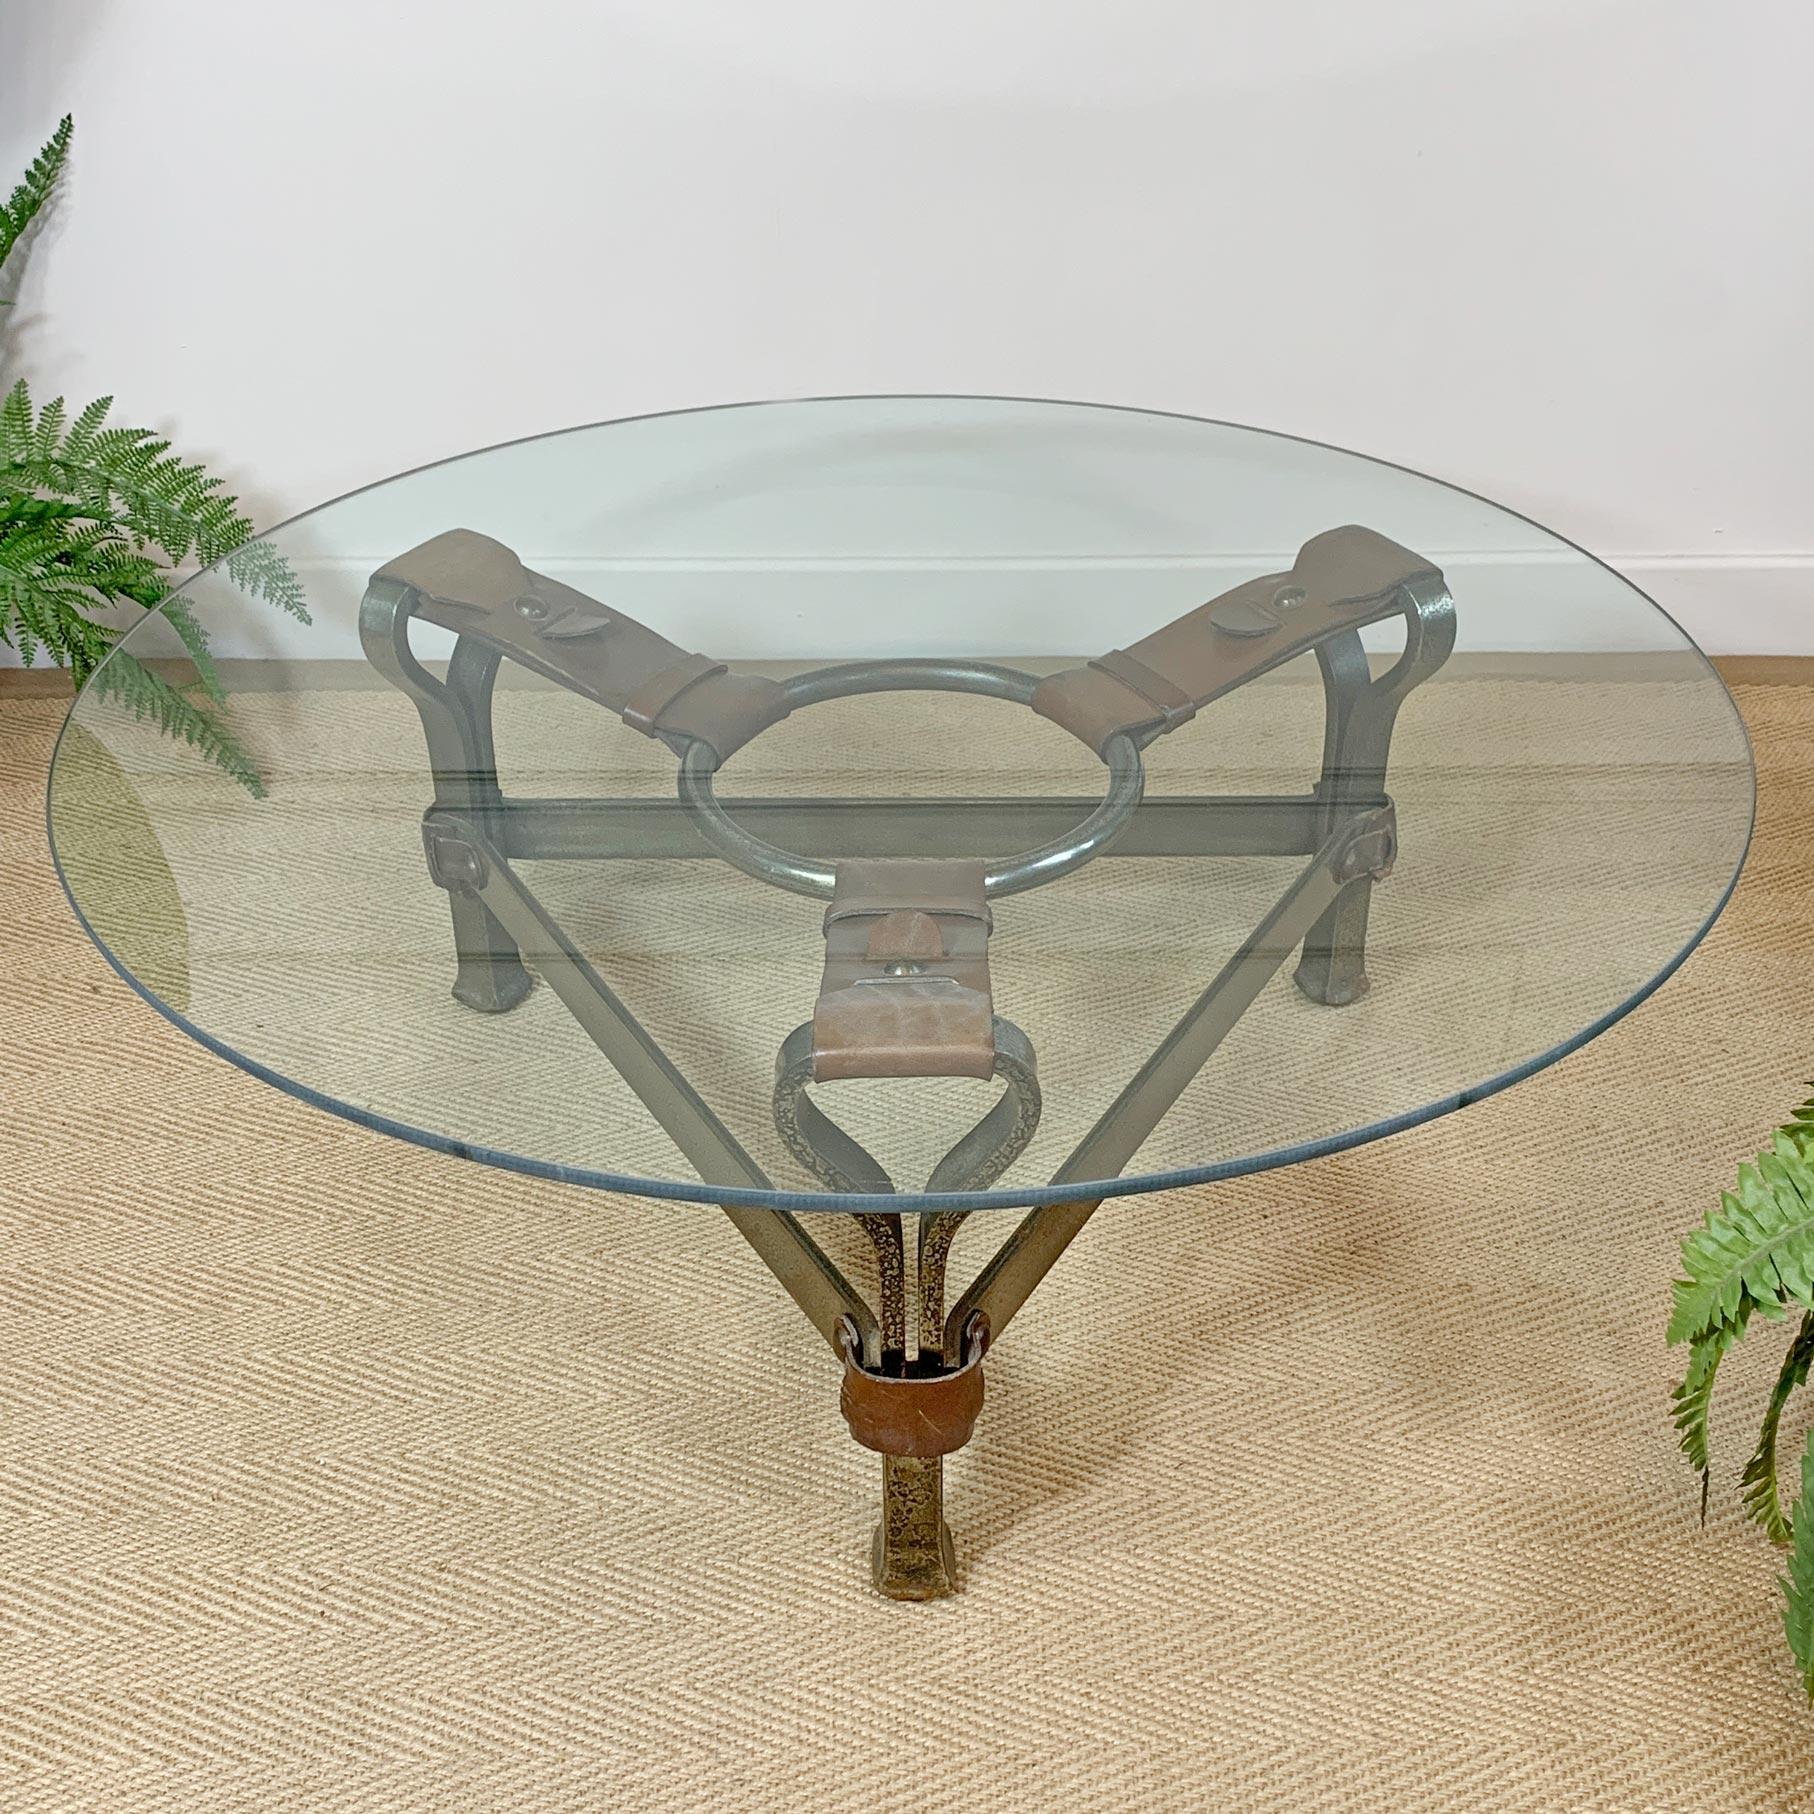 Jean-Pierre Ryckaert Tan Leather Strap and Steel Coffee Table For Sale 3